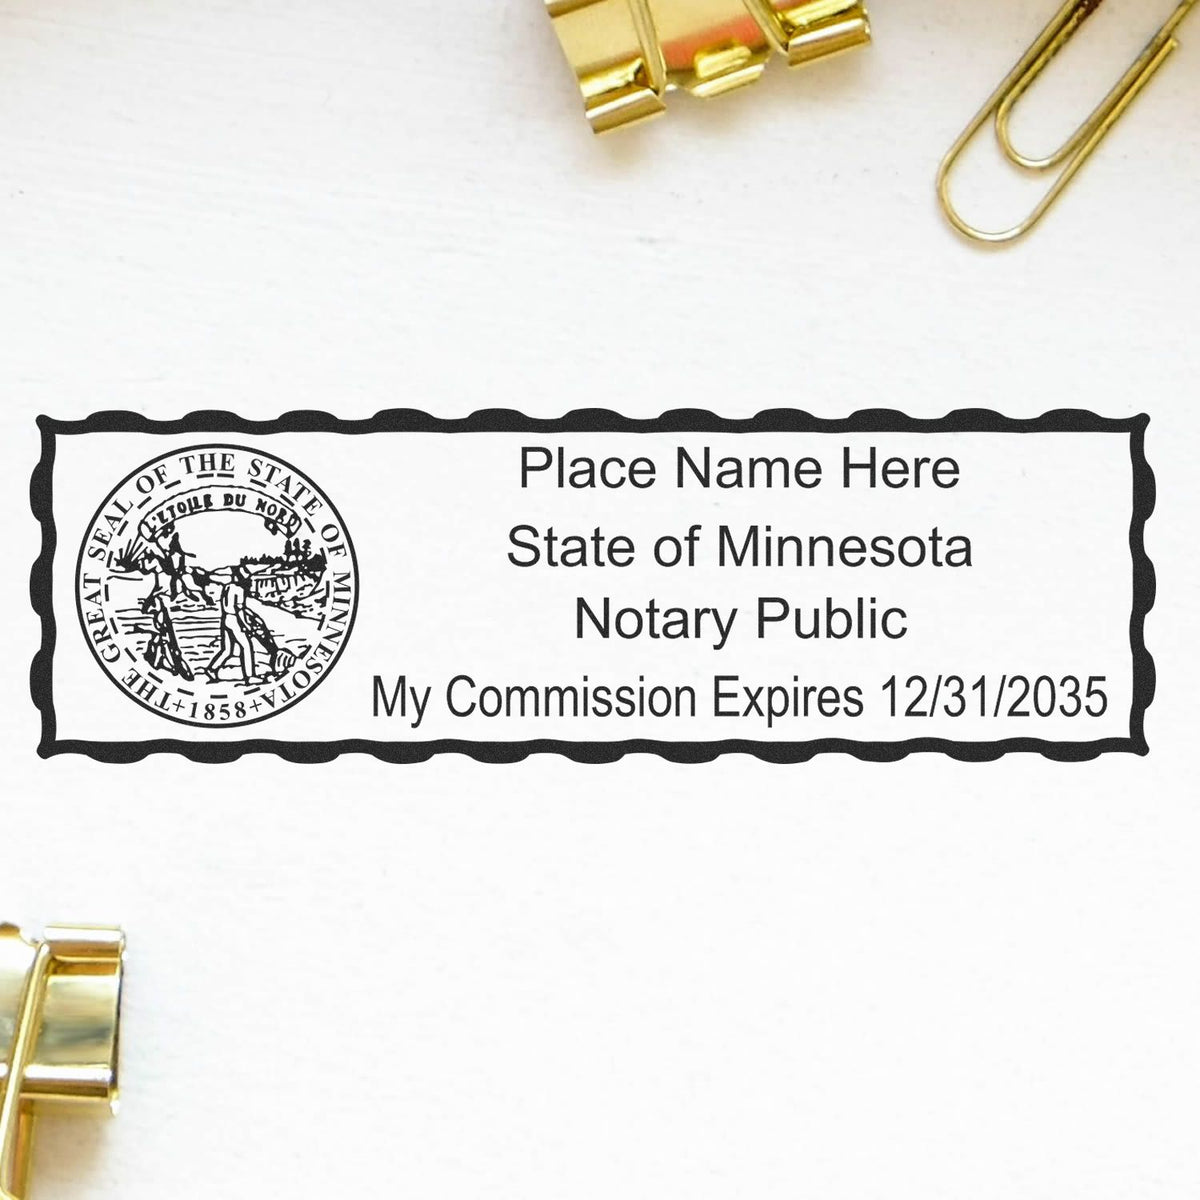 This paper is stamped with a sample imprint of the Super Slim Minnesota Notary Public Stamp, signifying its quality and reliability.